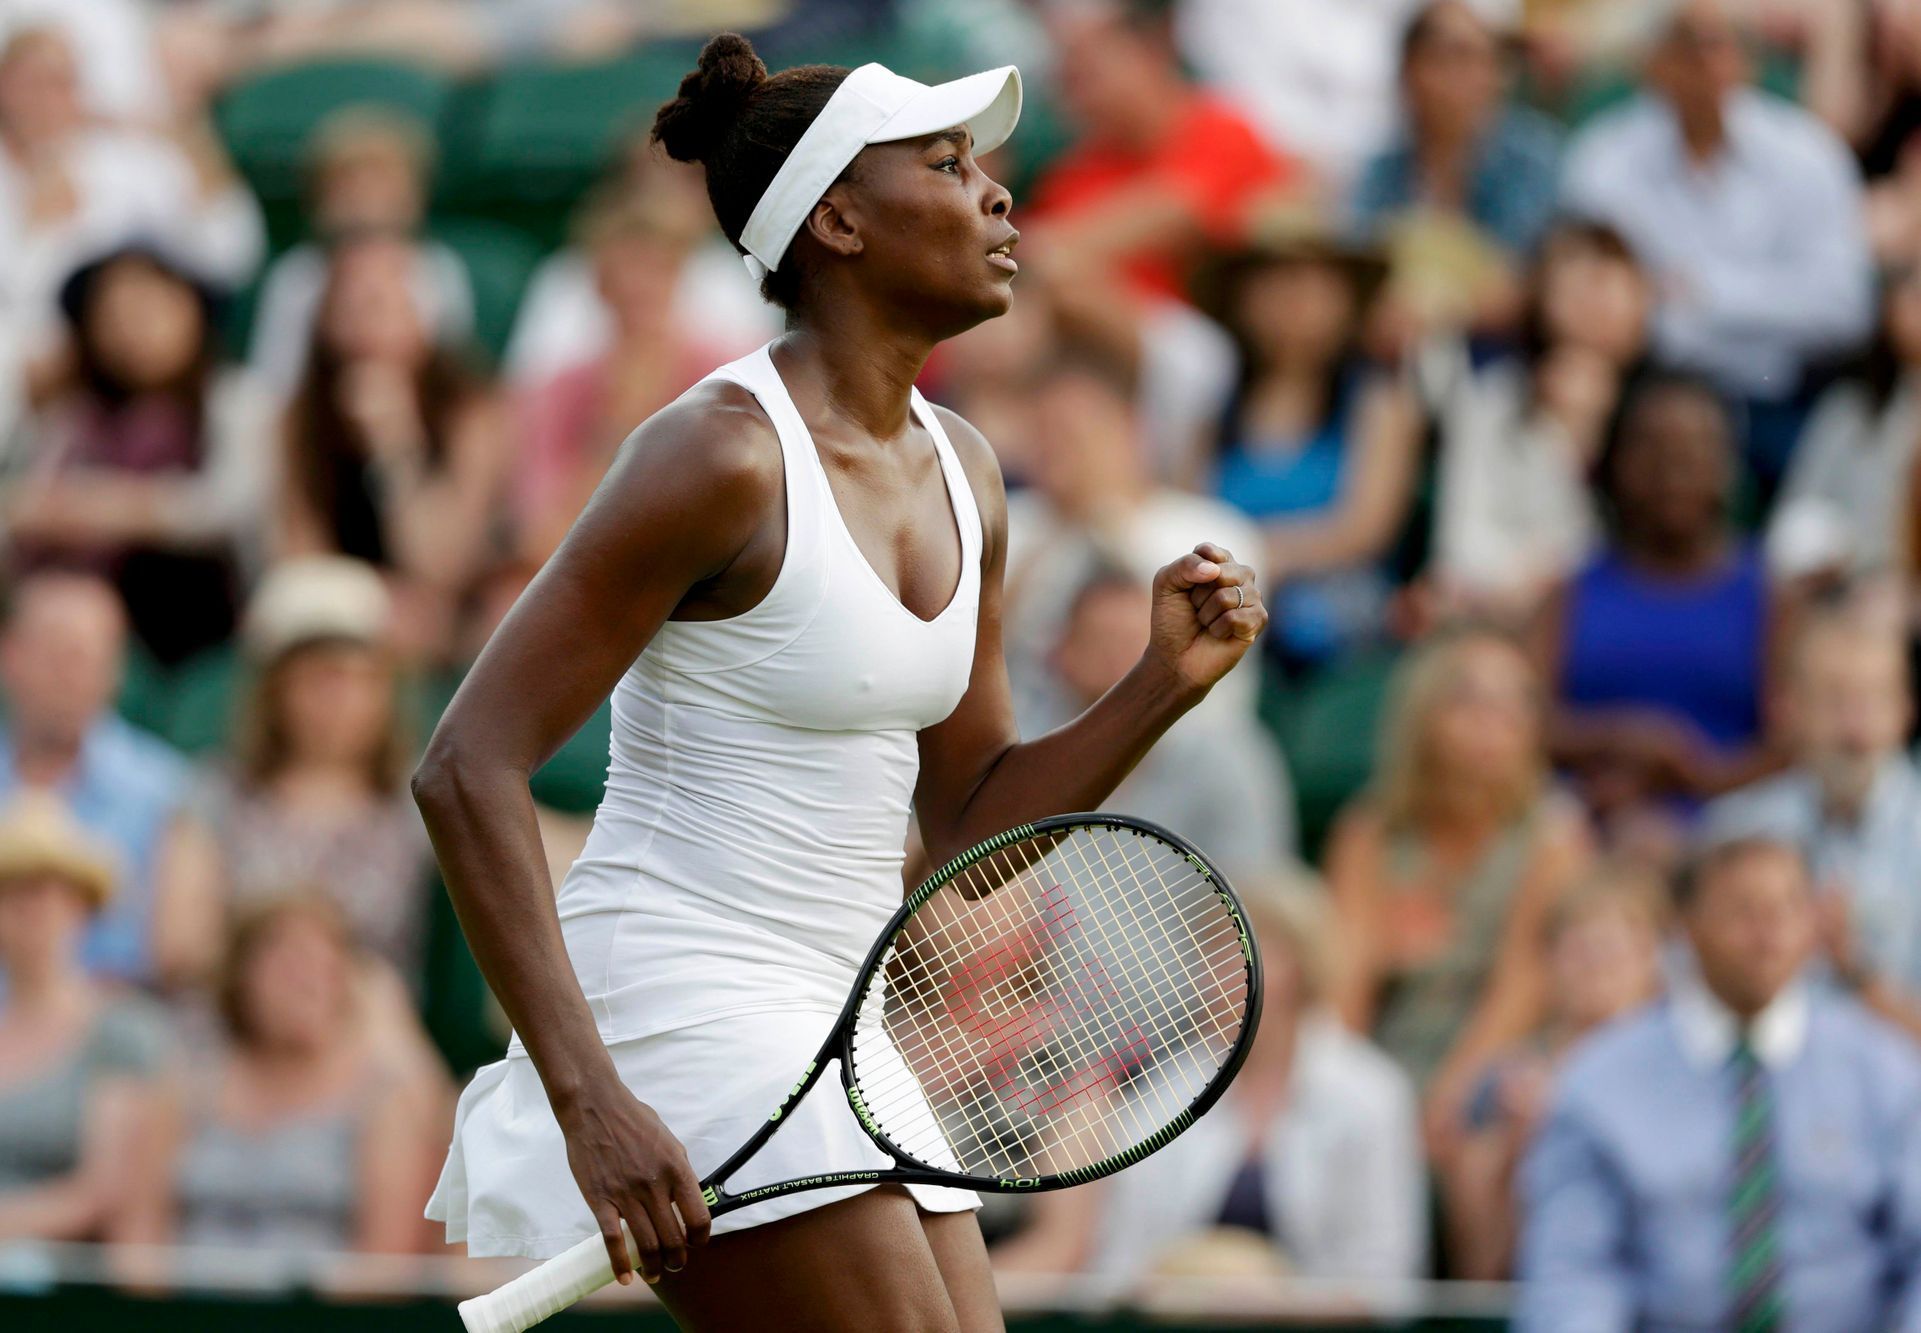 Venus Williams of the U.S.A. celebrates after winning the first set during her match against Yulia Putintseva of Kazakhstan at the Wimbledon Tennis Championships in London